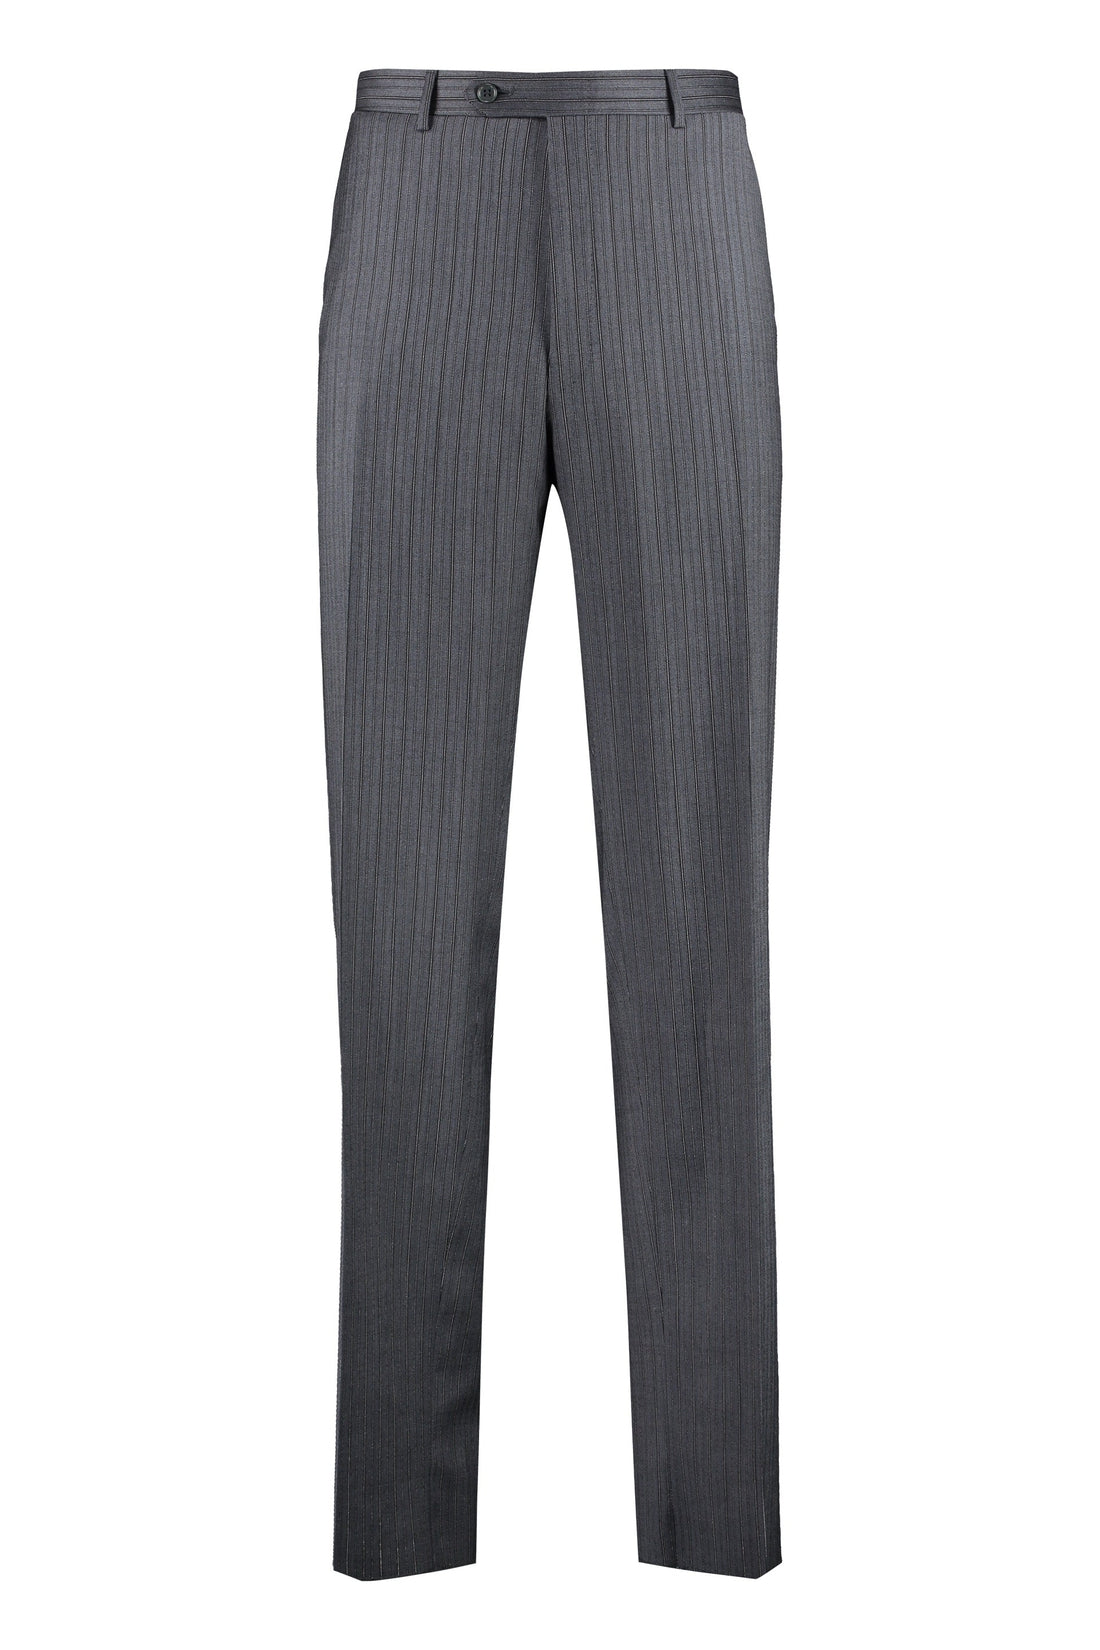 Canali-OUTLET-SALE-Pin-striped wool tailored trousers-ARCHIVIST